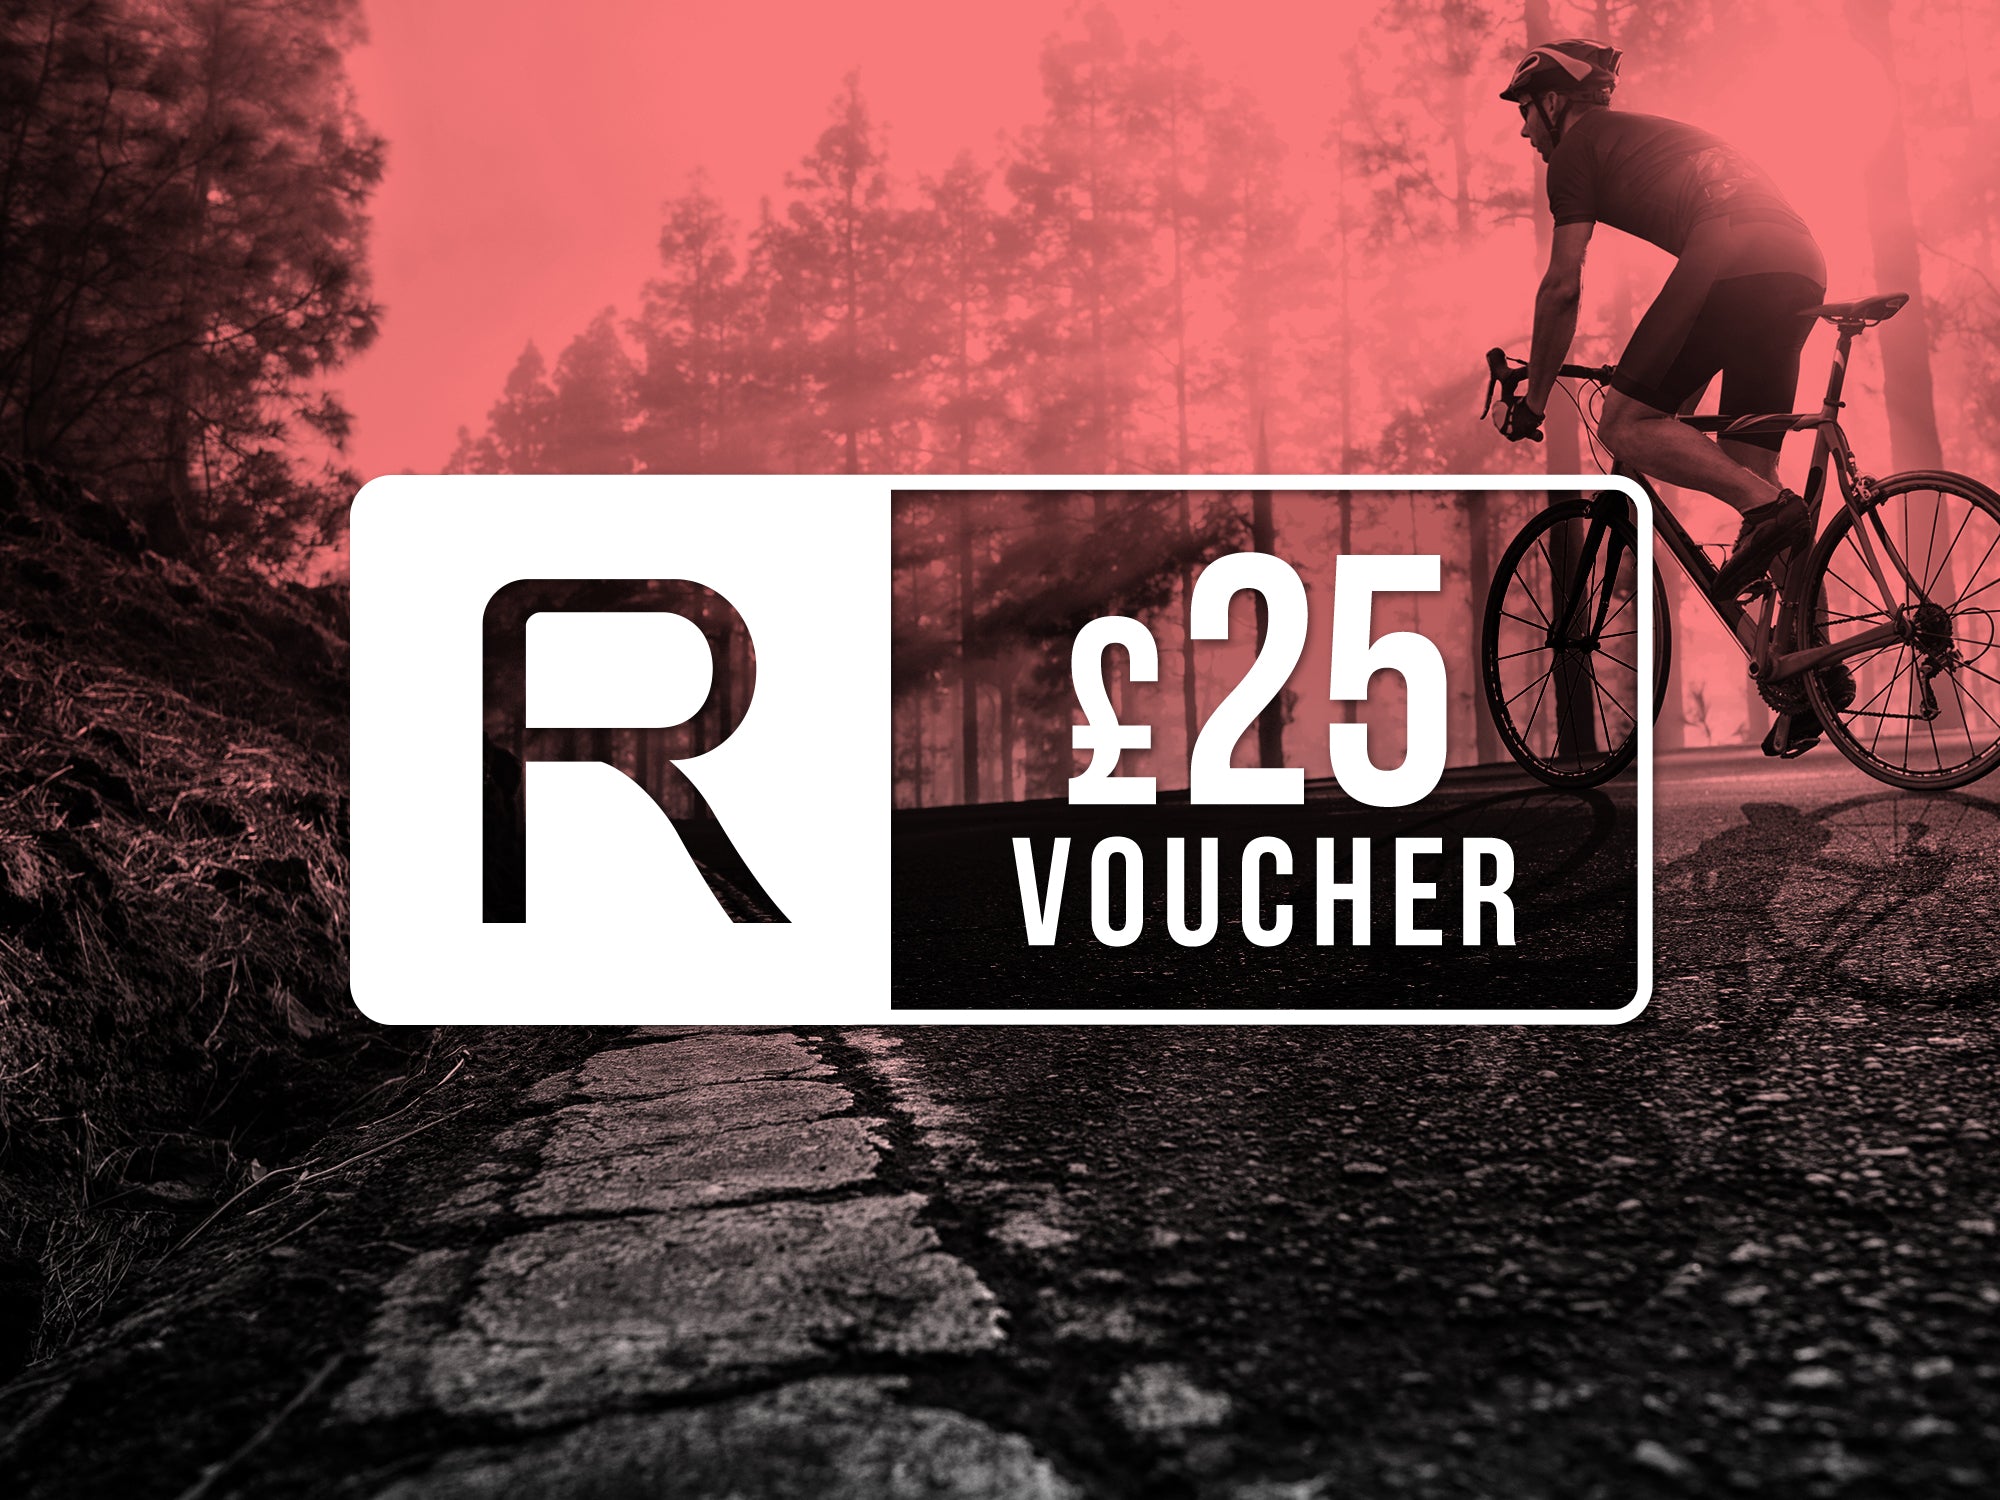 Reilly £25 Gift Voucher showing image of a cyclist in a forest with Reilly logo in the foreground with red tint.